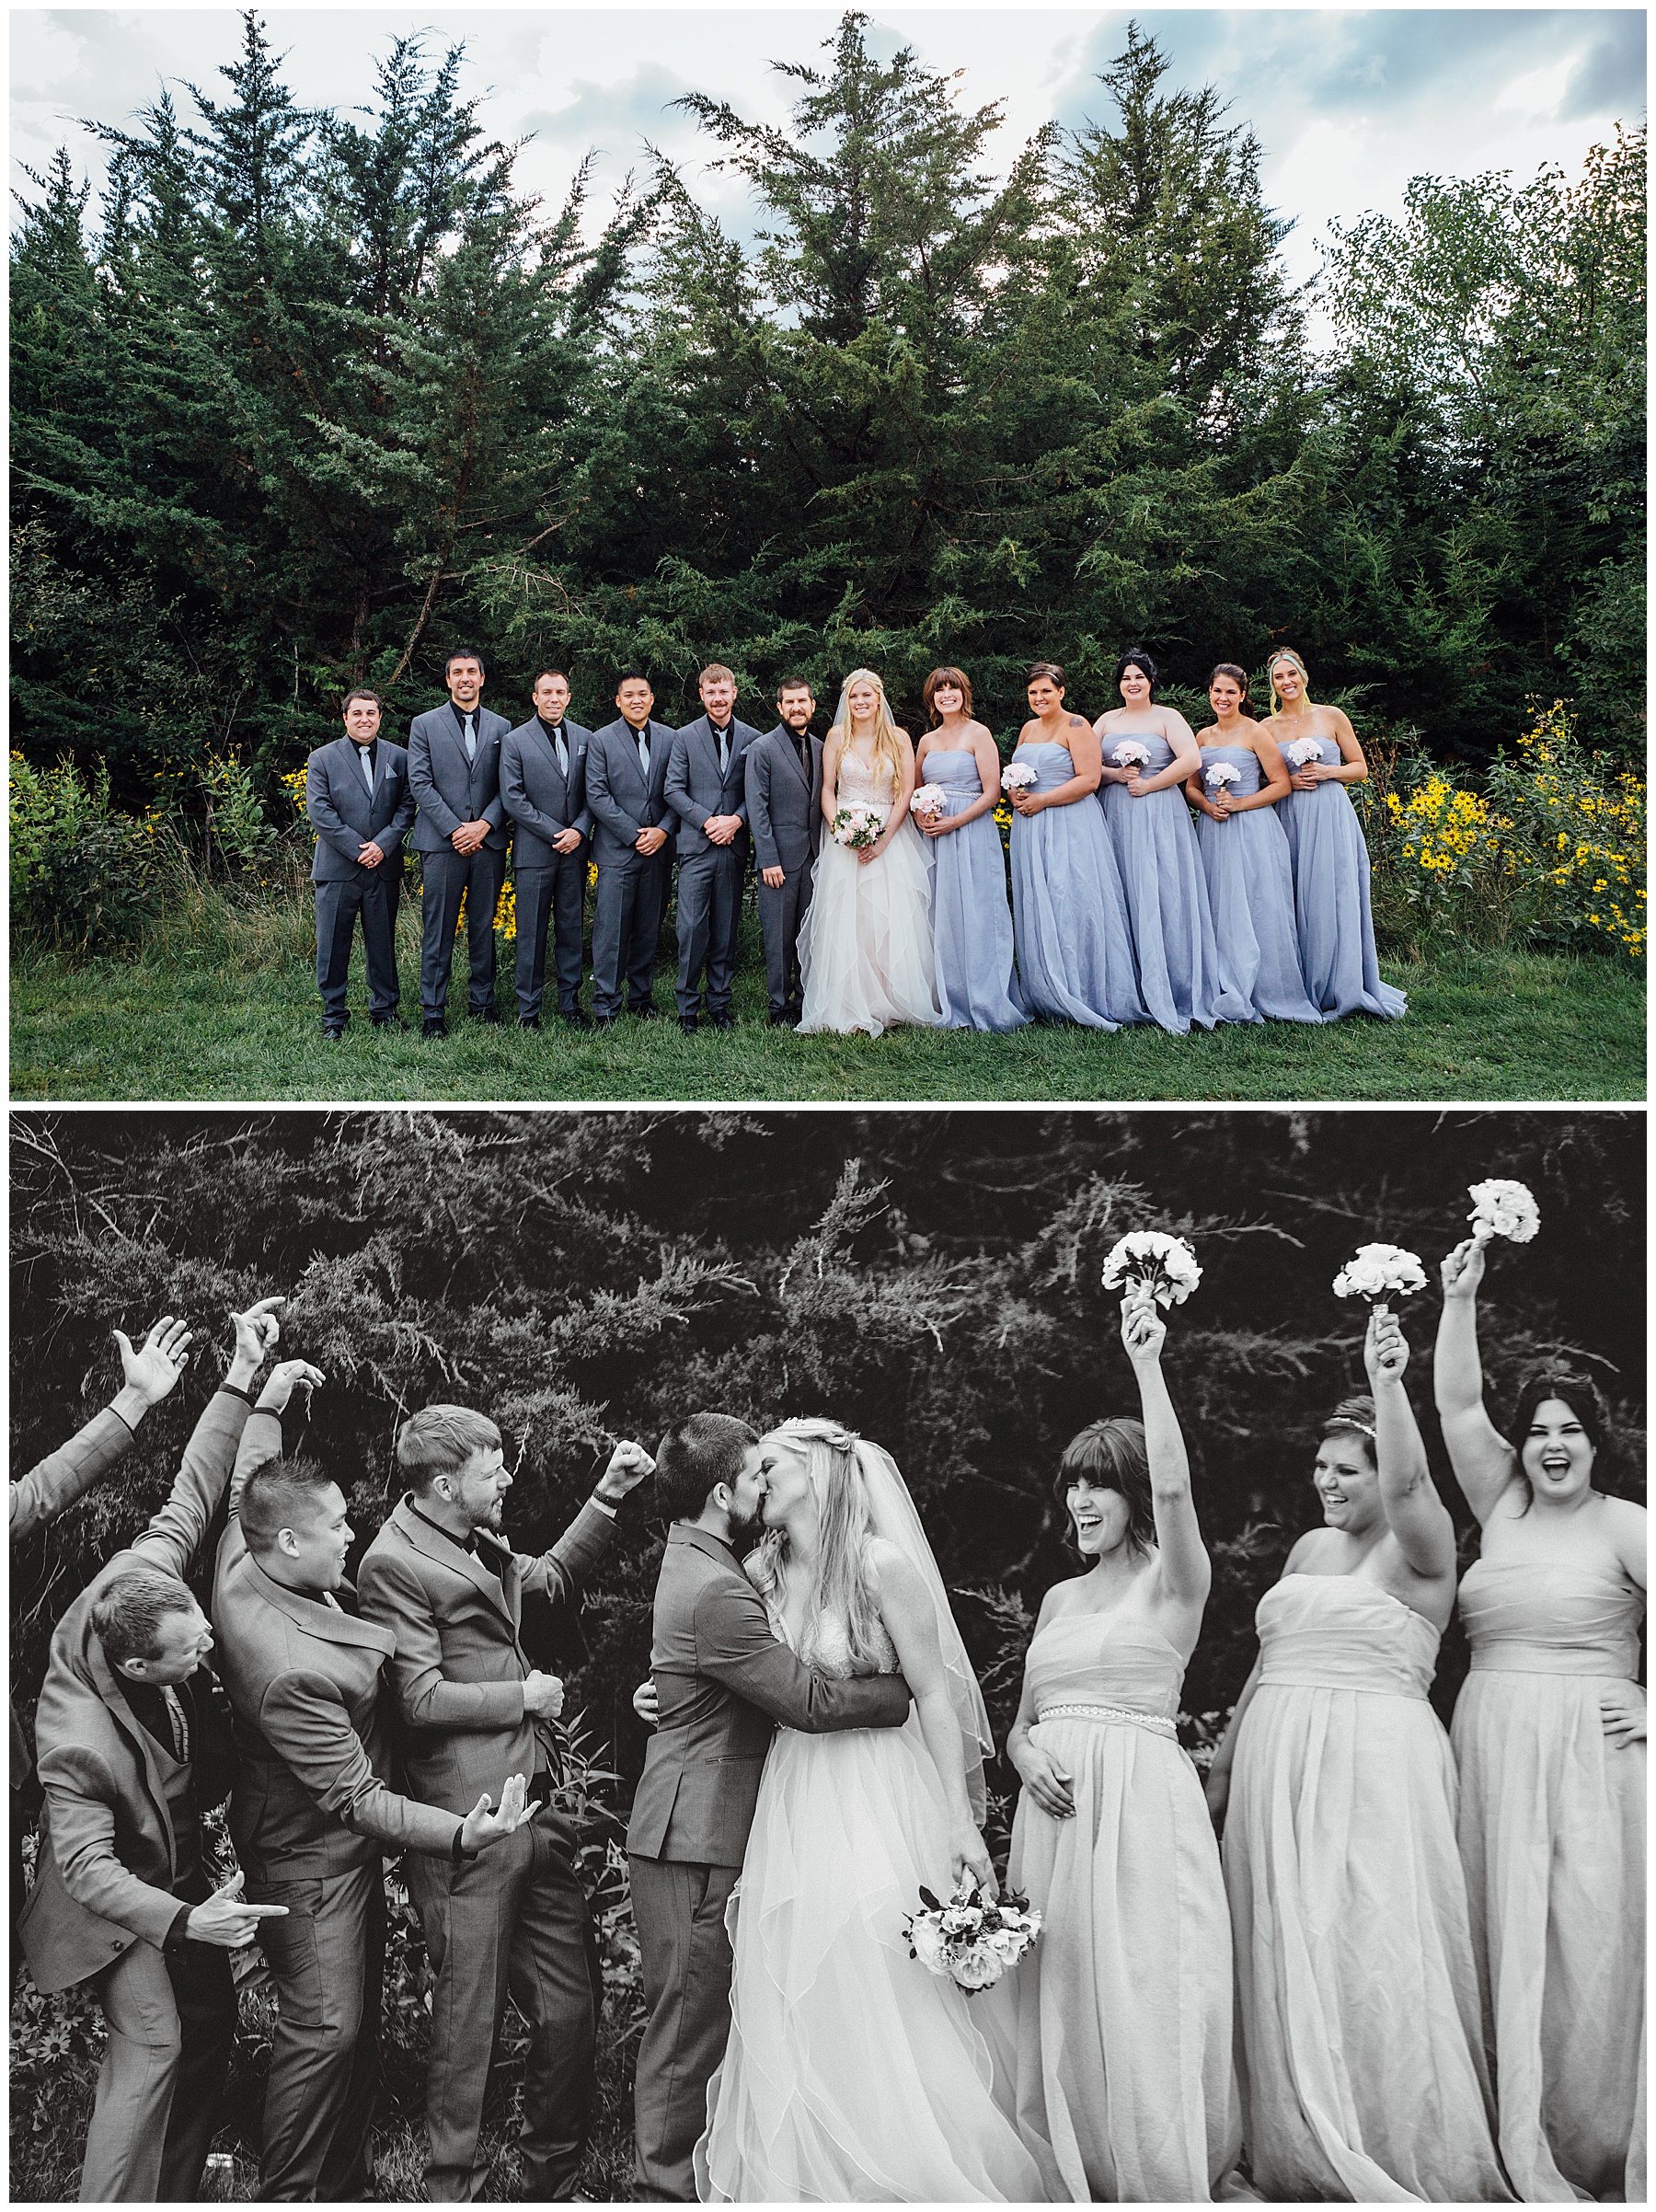 Andrea Bibeault: a wedding photojournalist specializes in real,photojournalistic wedding photography. Based in Omaha,we travel all over the midwest and country.,